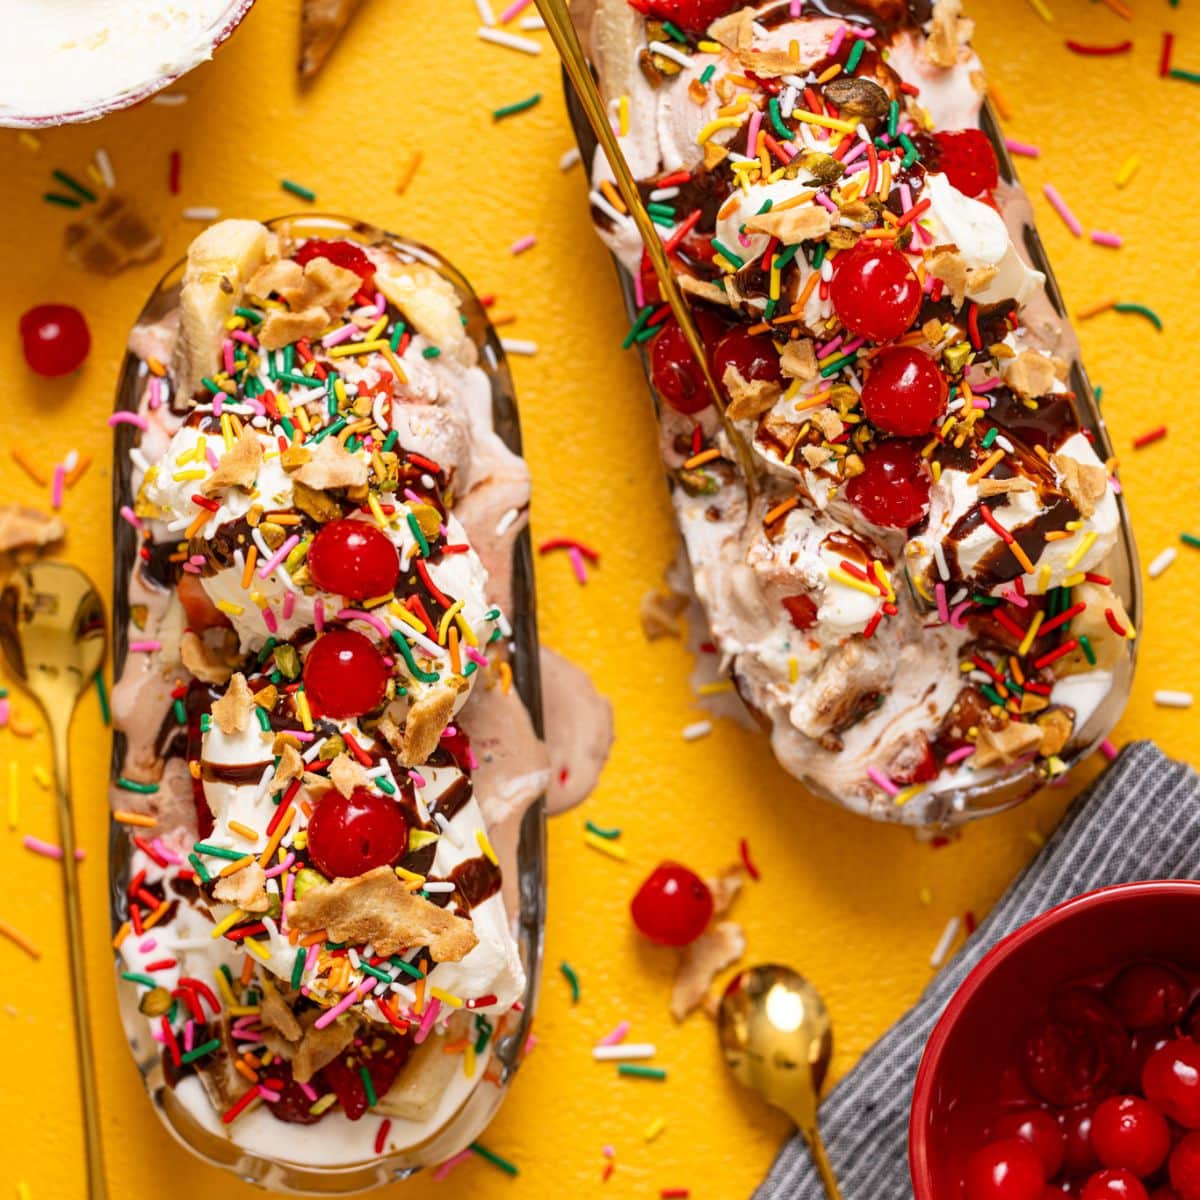 Banana split ice creams on a yellow table with cherries, cones, and more.